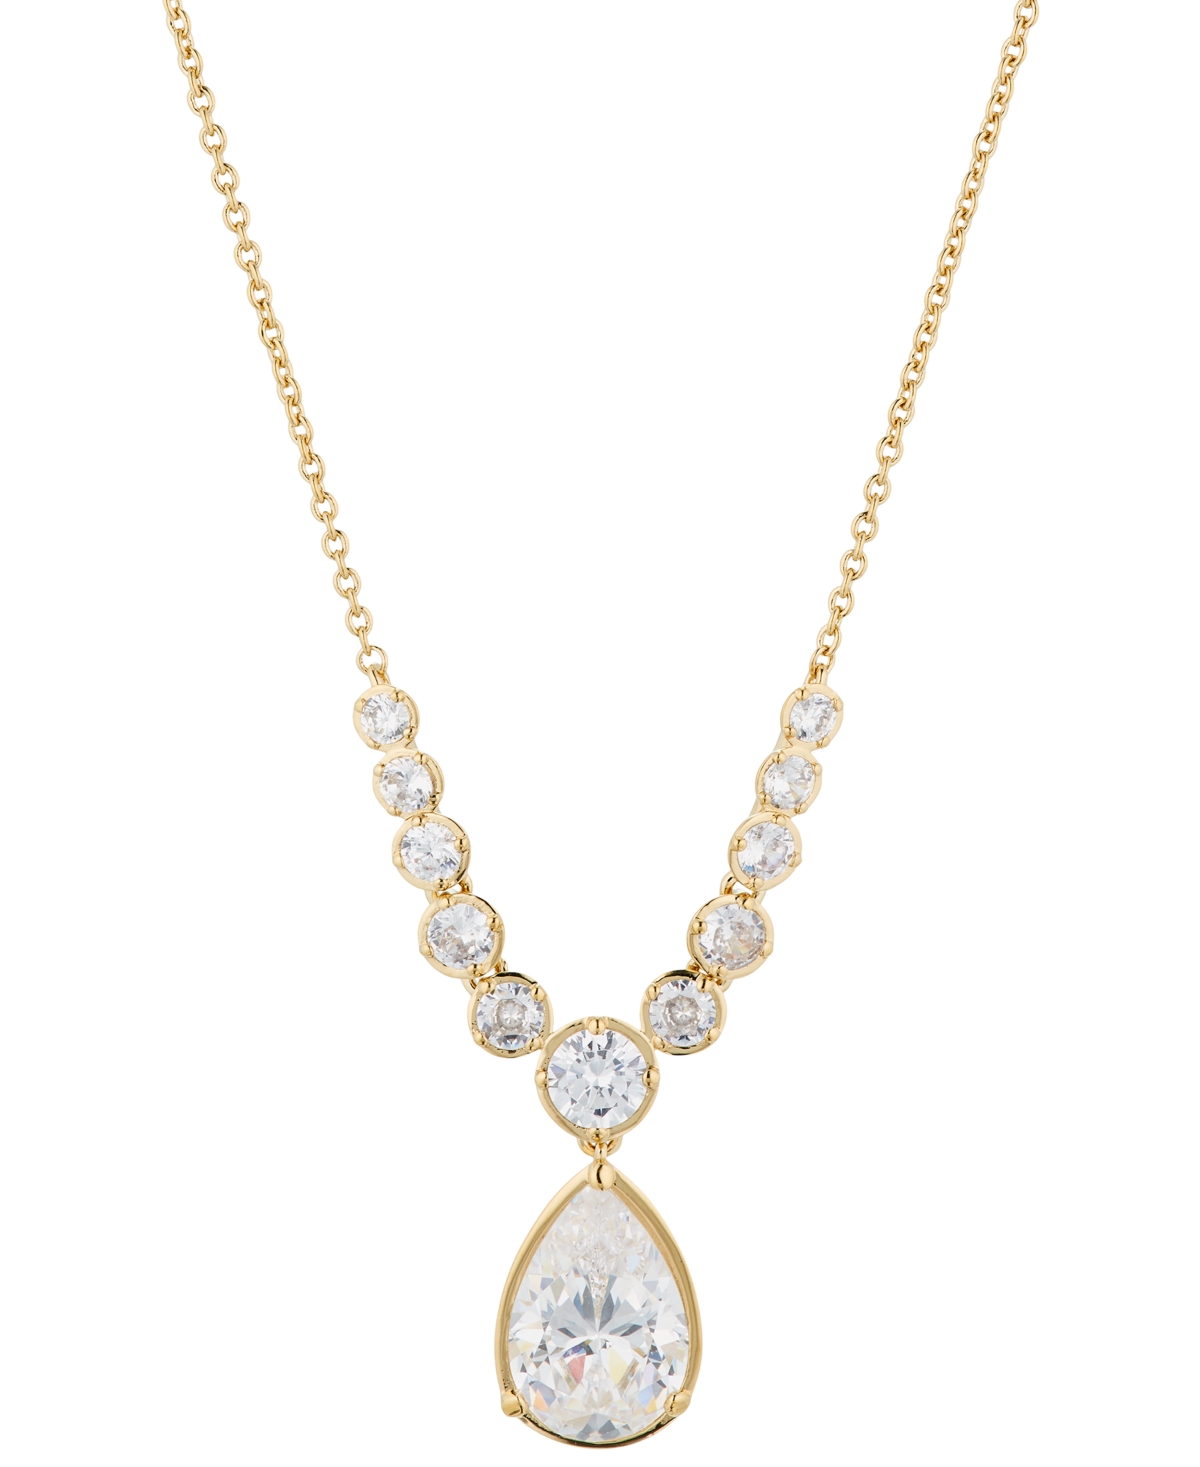 Eliot Danori 18k Gold-plated Pear-shape Cubic Zirconia Pendant Necklace, 16" + 2" Extender, Created For Macy's